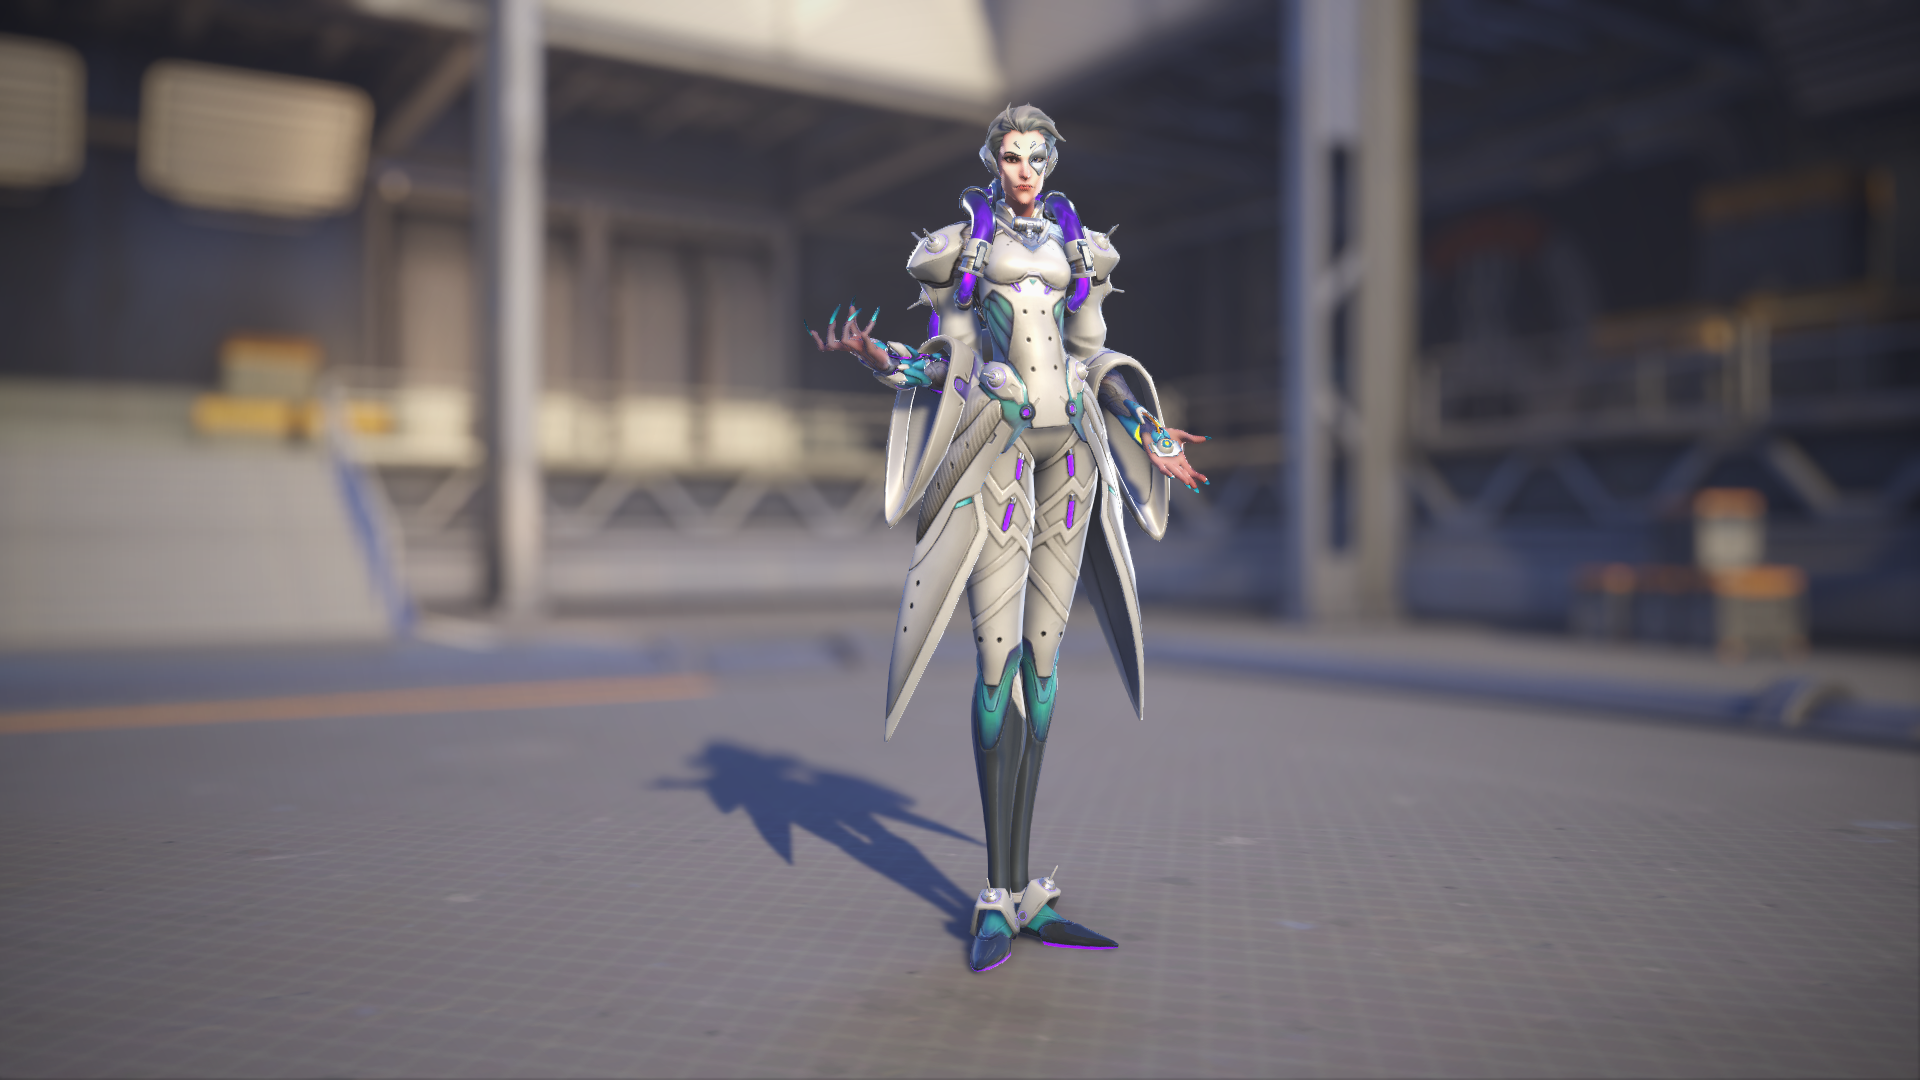 Moira models her Pale skin in Overwatch 2.